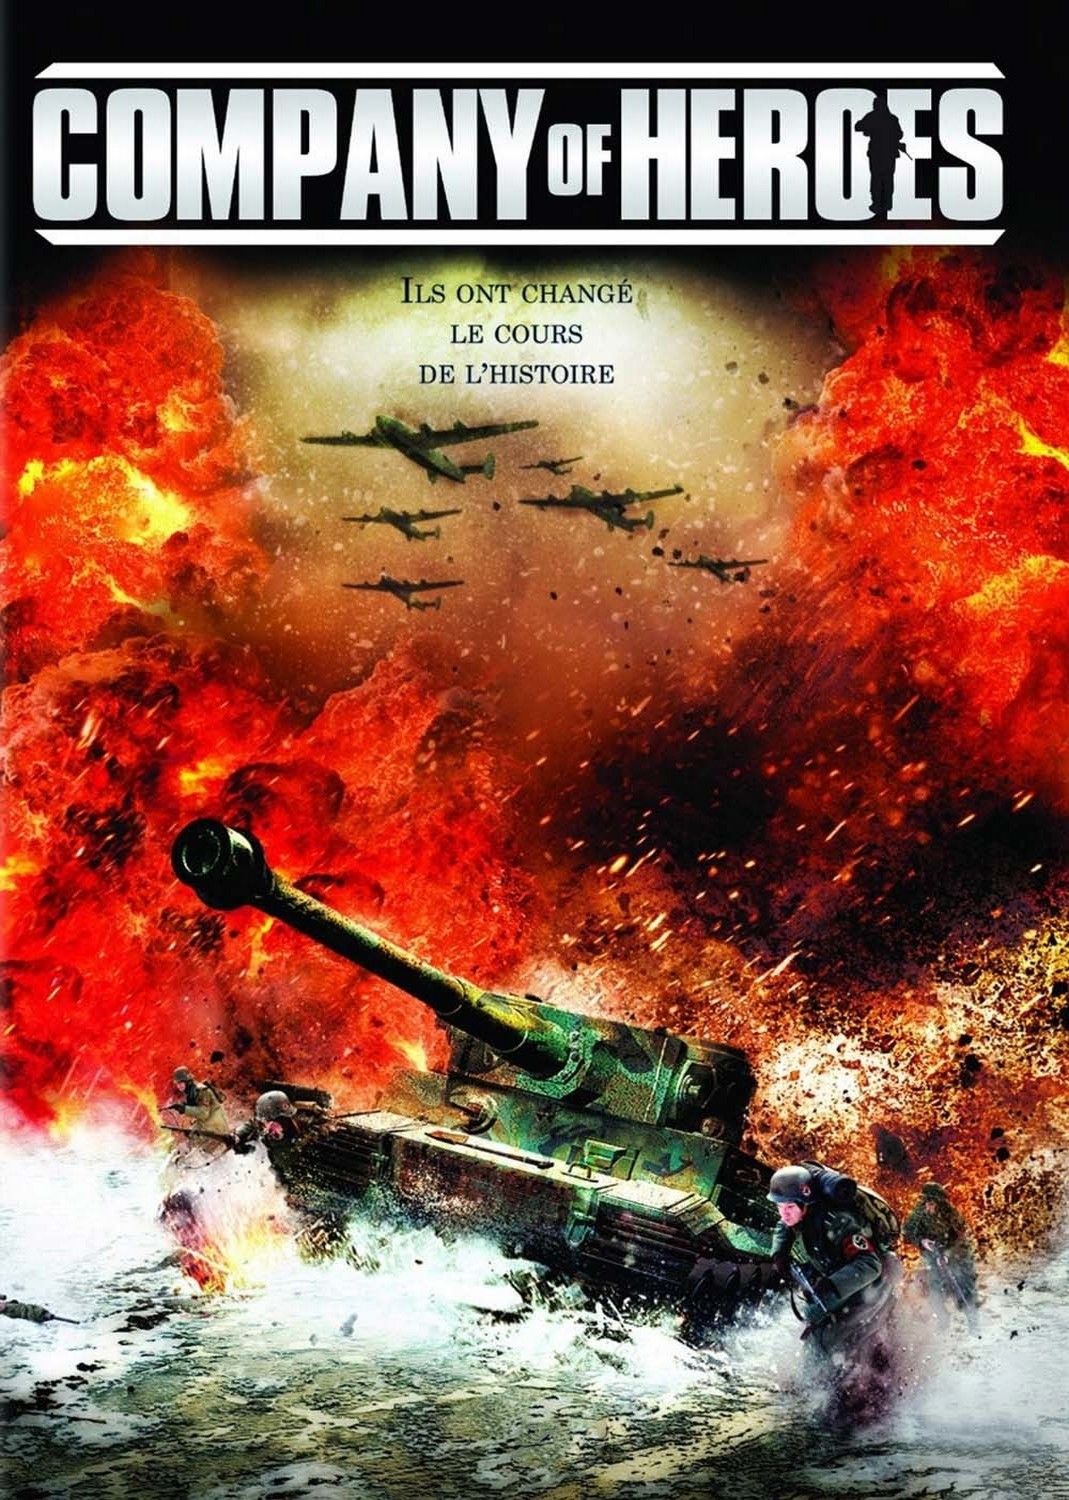 company of heroes 2013 english subtitles download